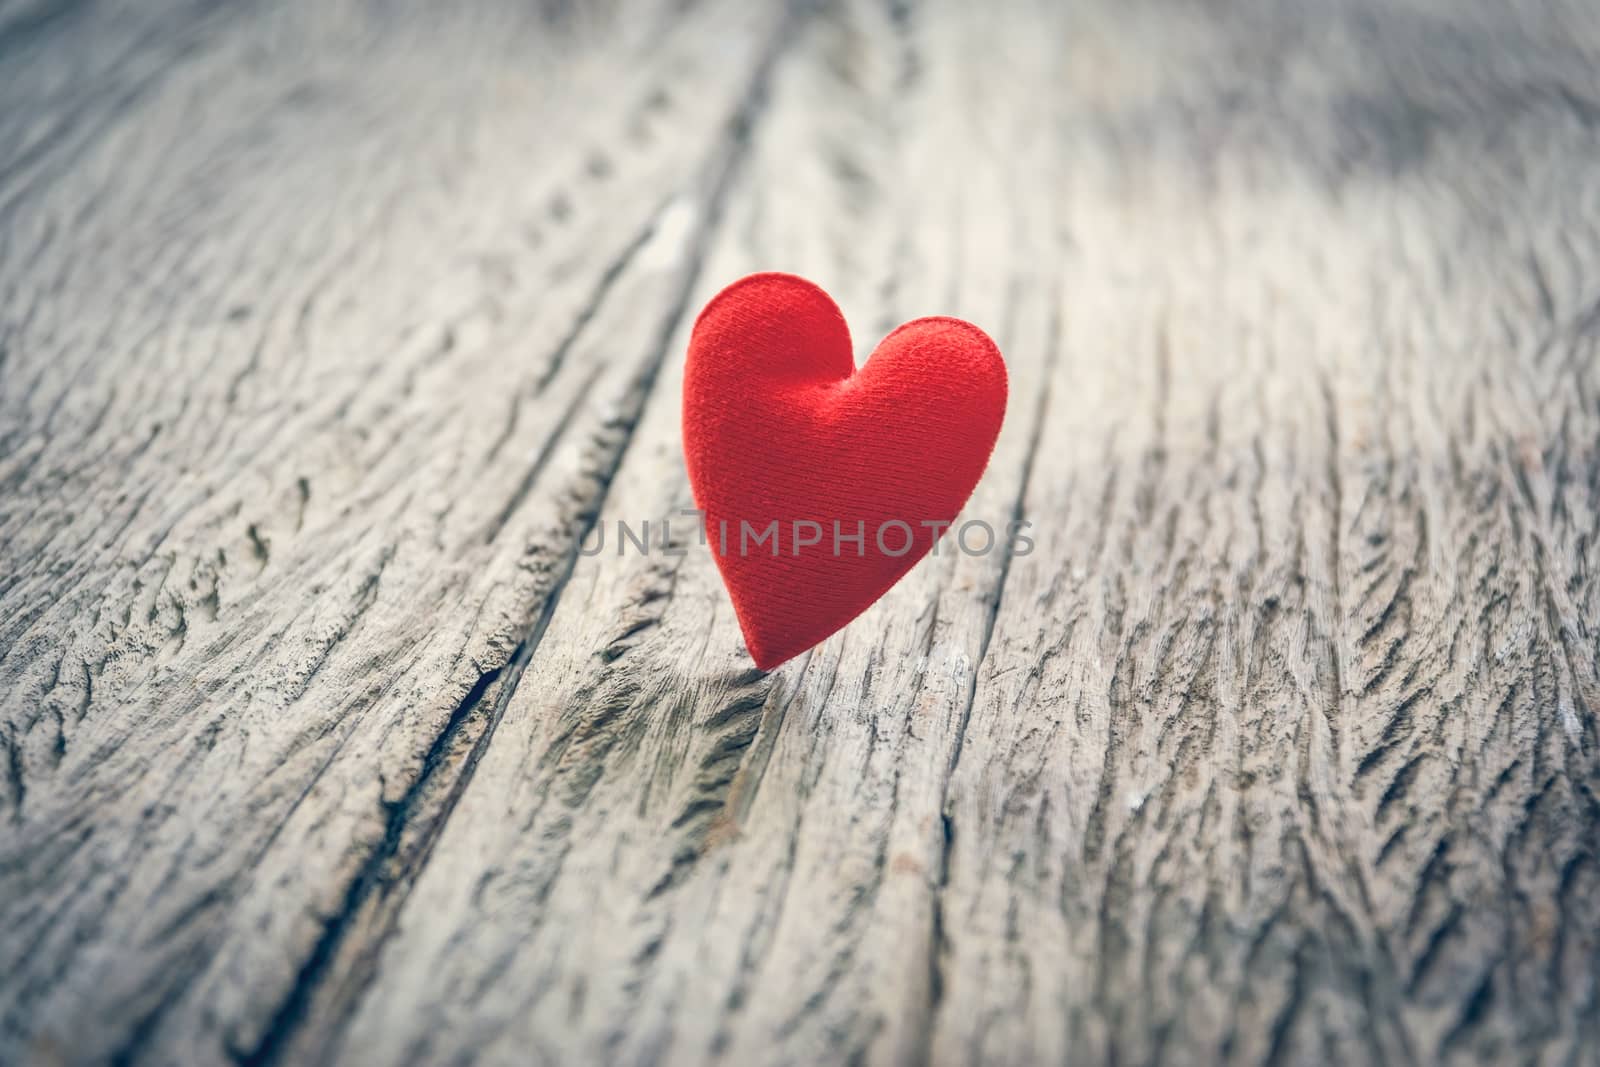 Red heart on wooden floor with copy space for text, used in love concept on Valentine's Day.